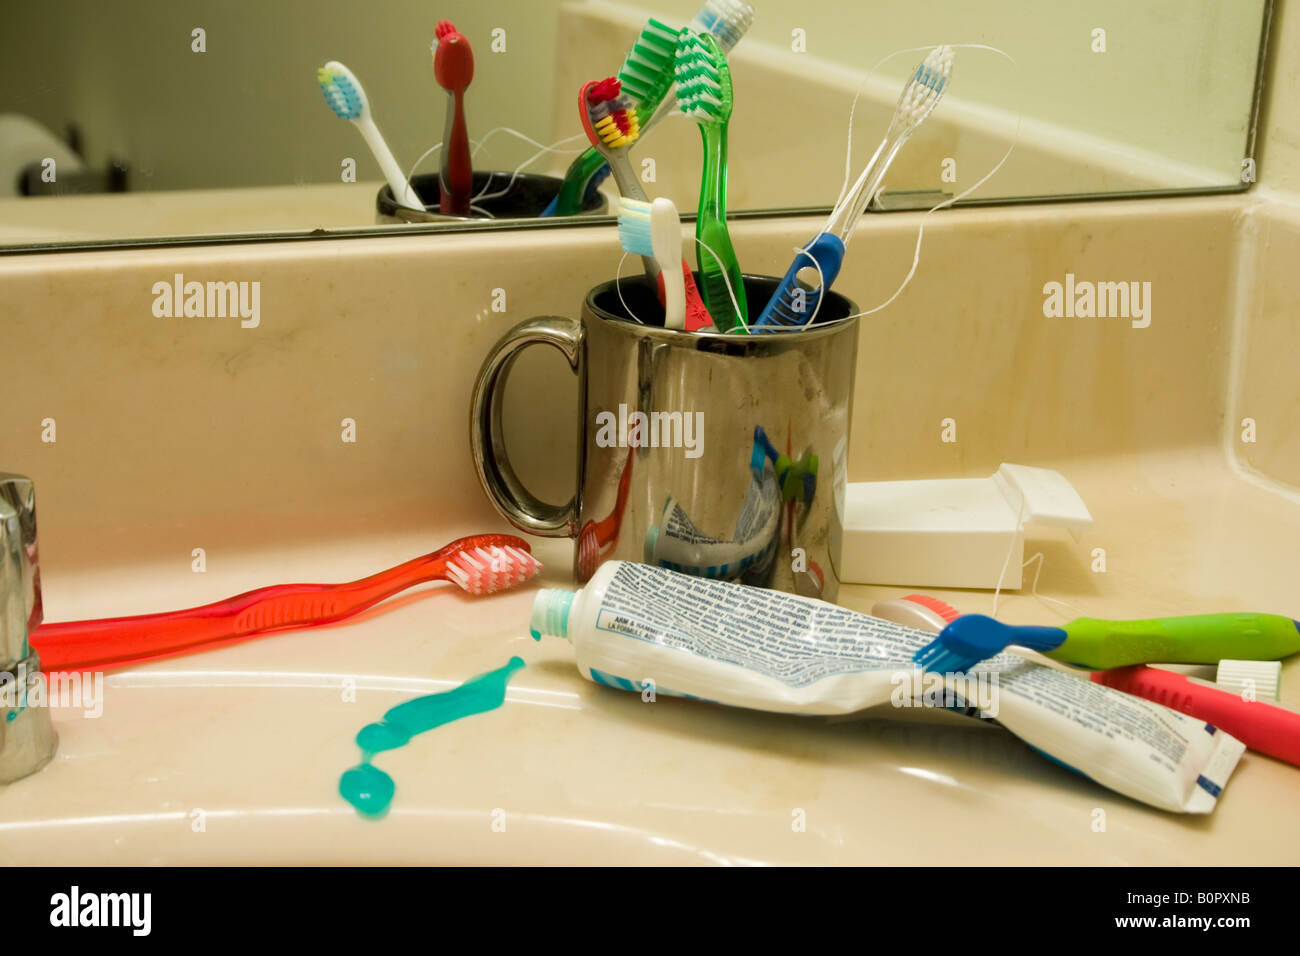 A messy family bathroom with variety of toothbrushes around the sink Stock Photo